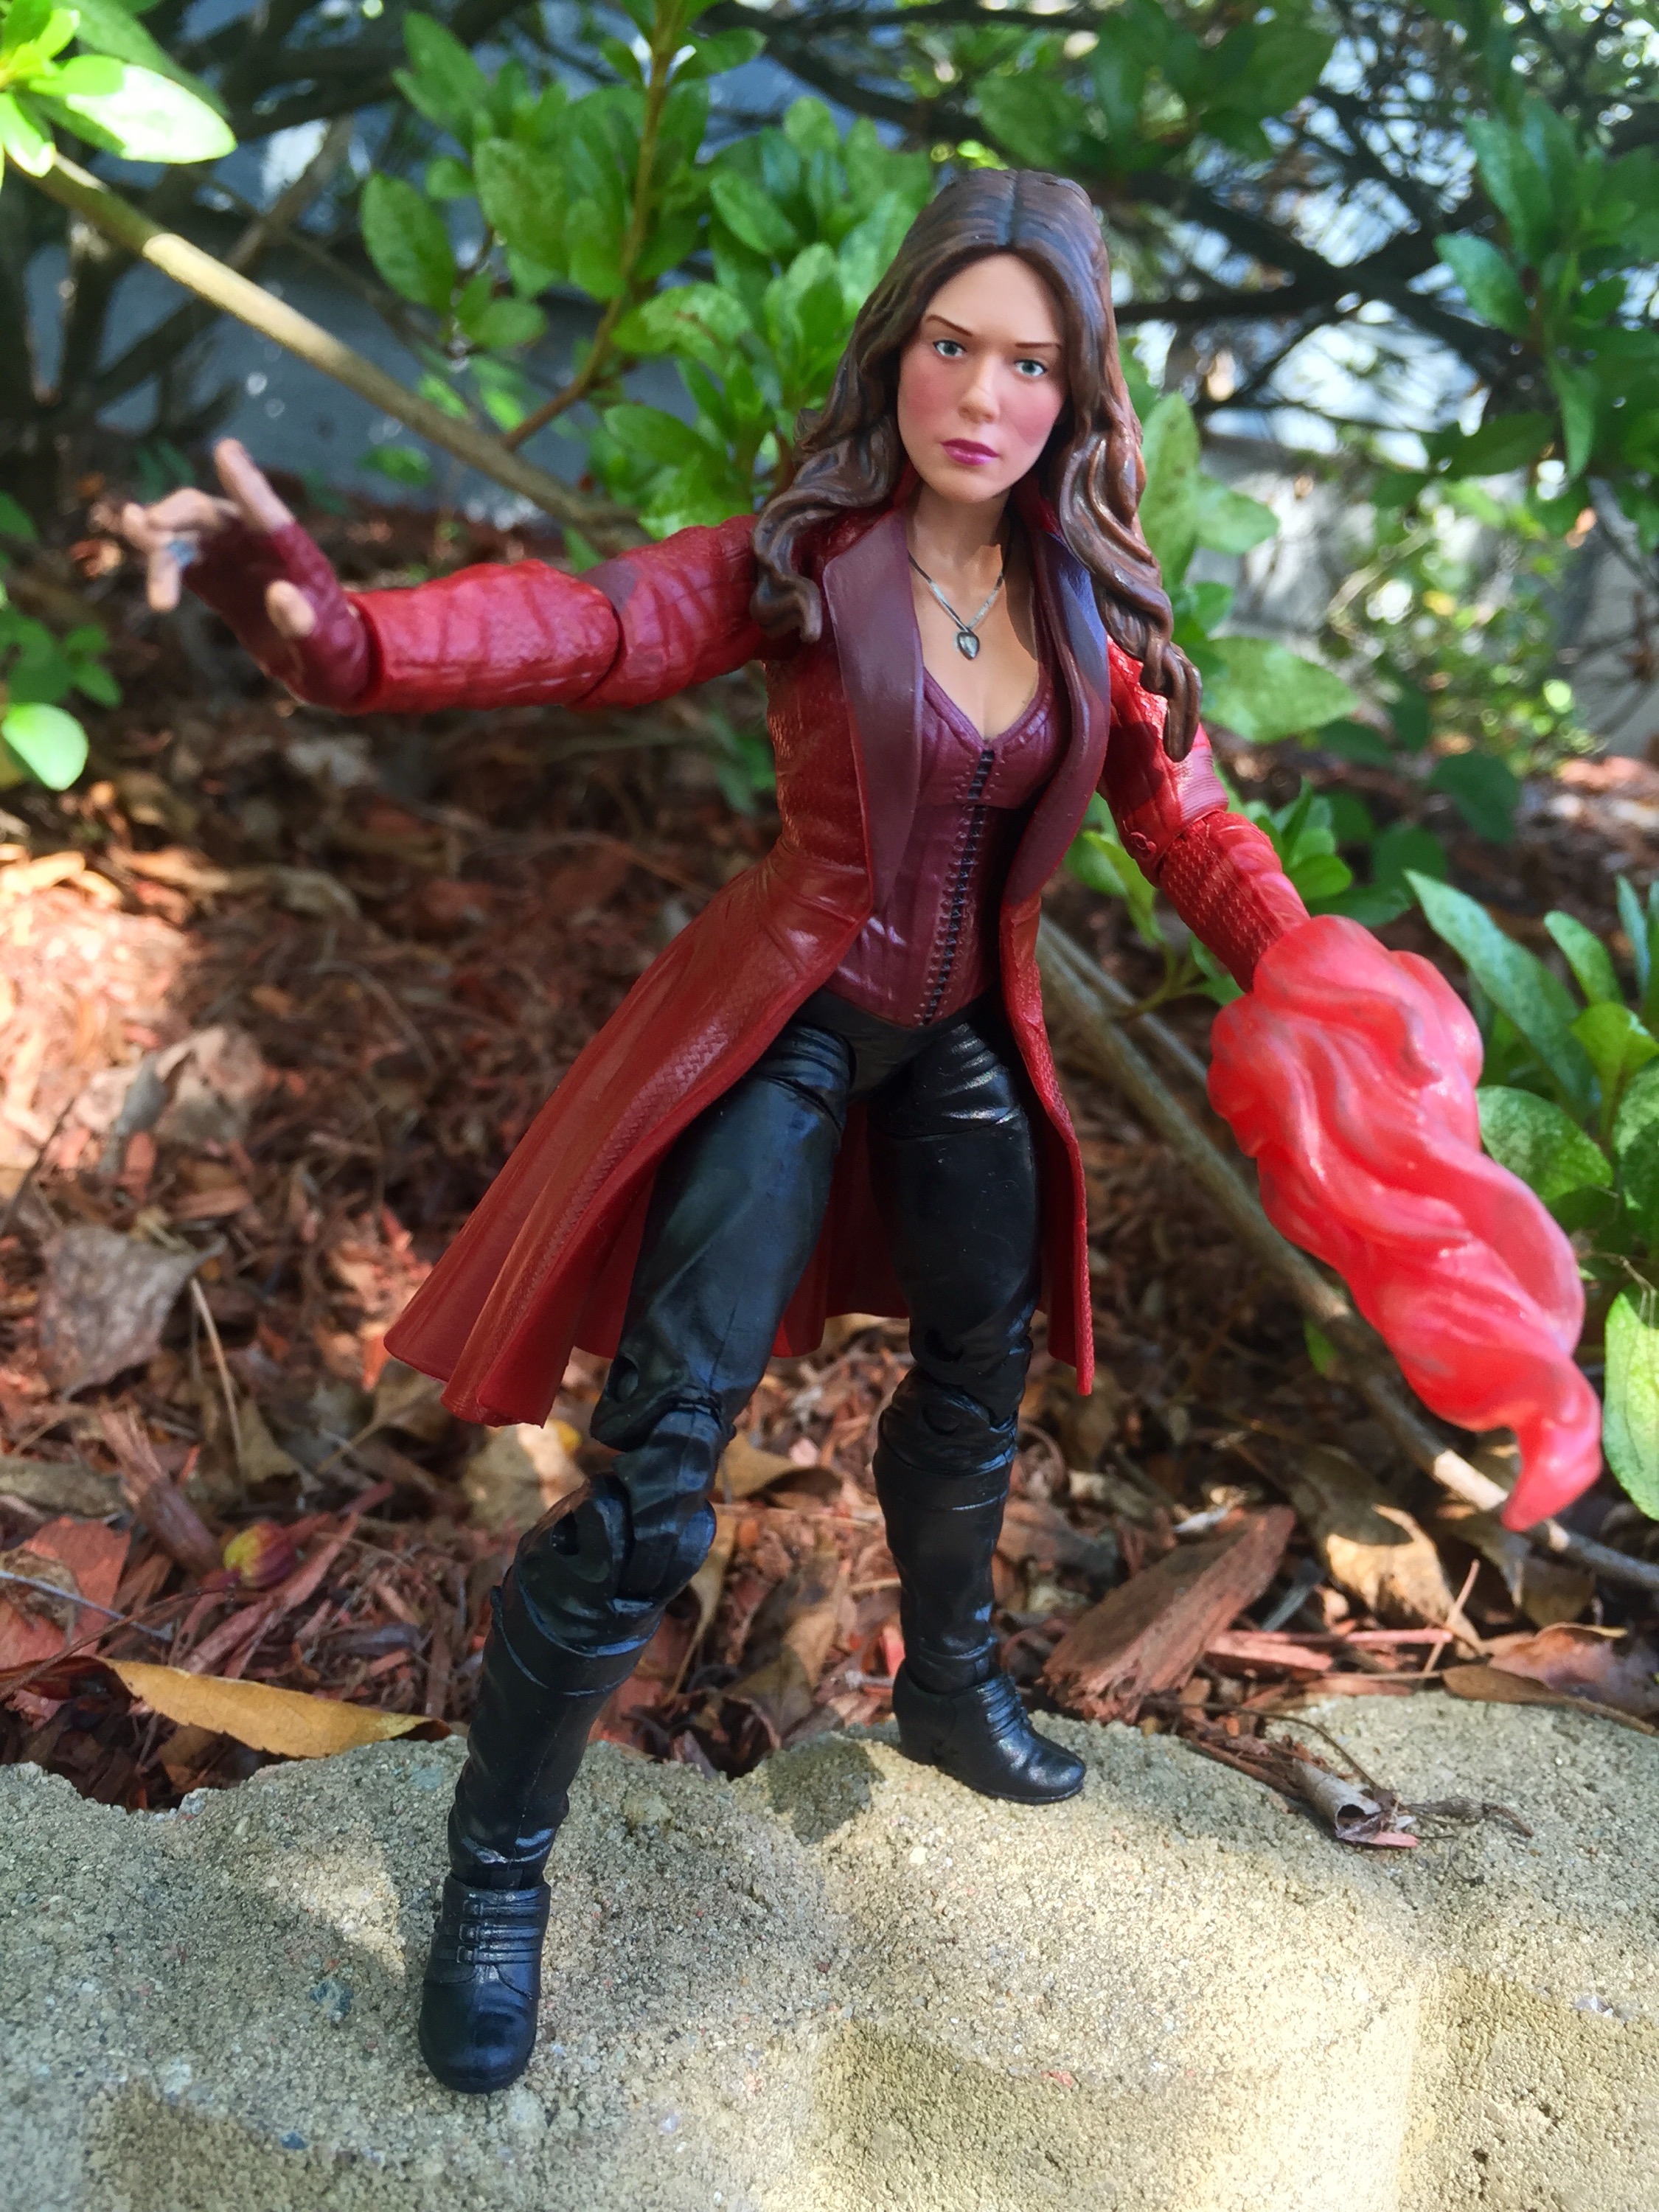 Marvel Legends Scarlet Witch Exclusive Reveal - The Toyark - News